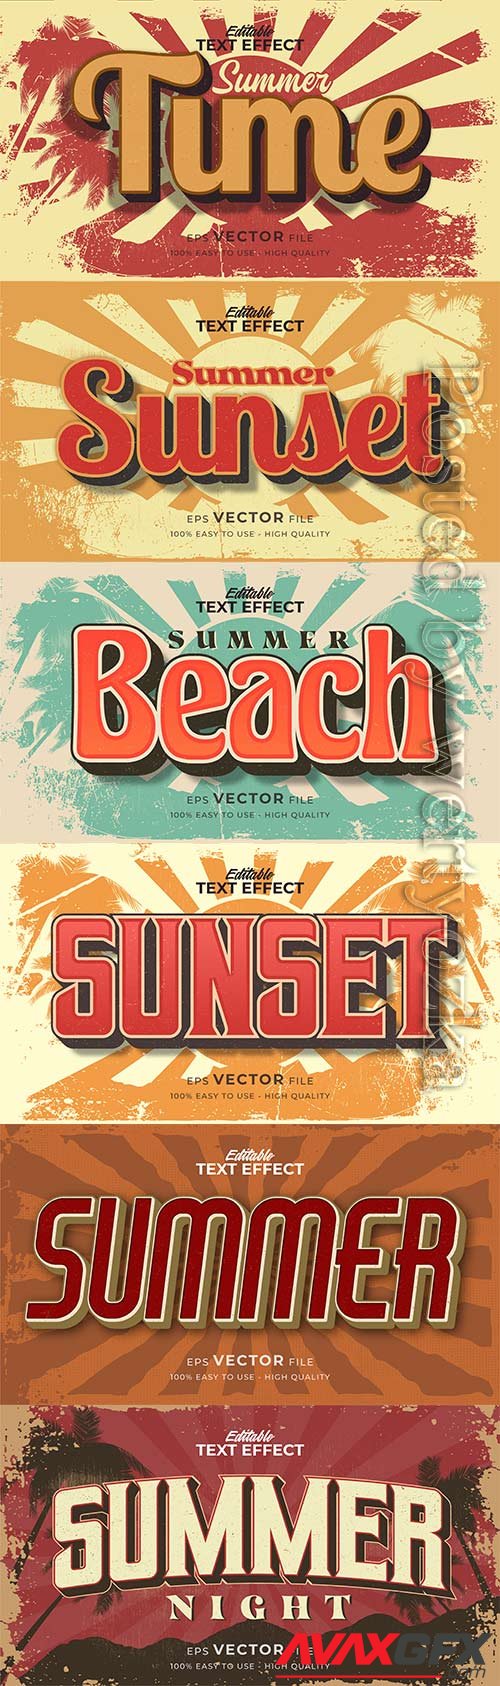 Retro summer holiday text in grunge style theme in vector vol 4